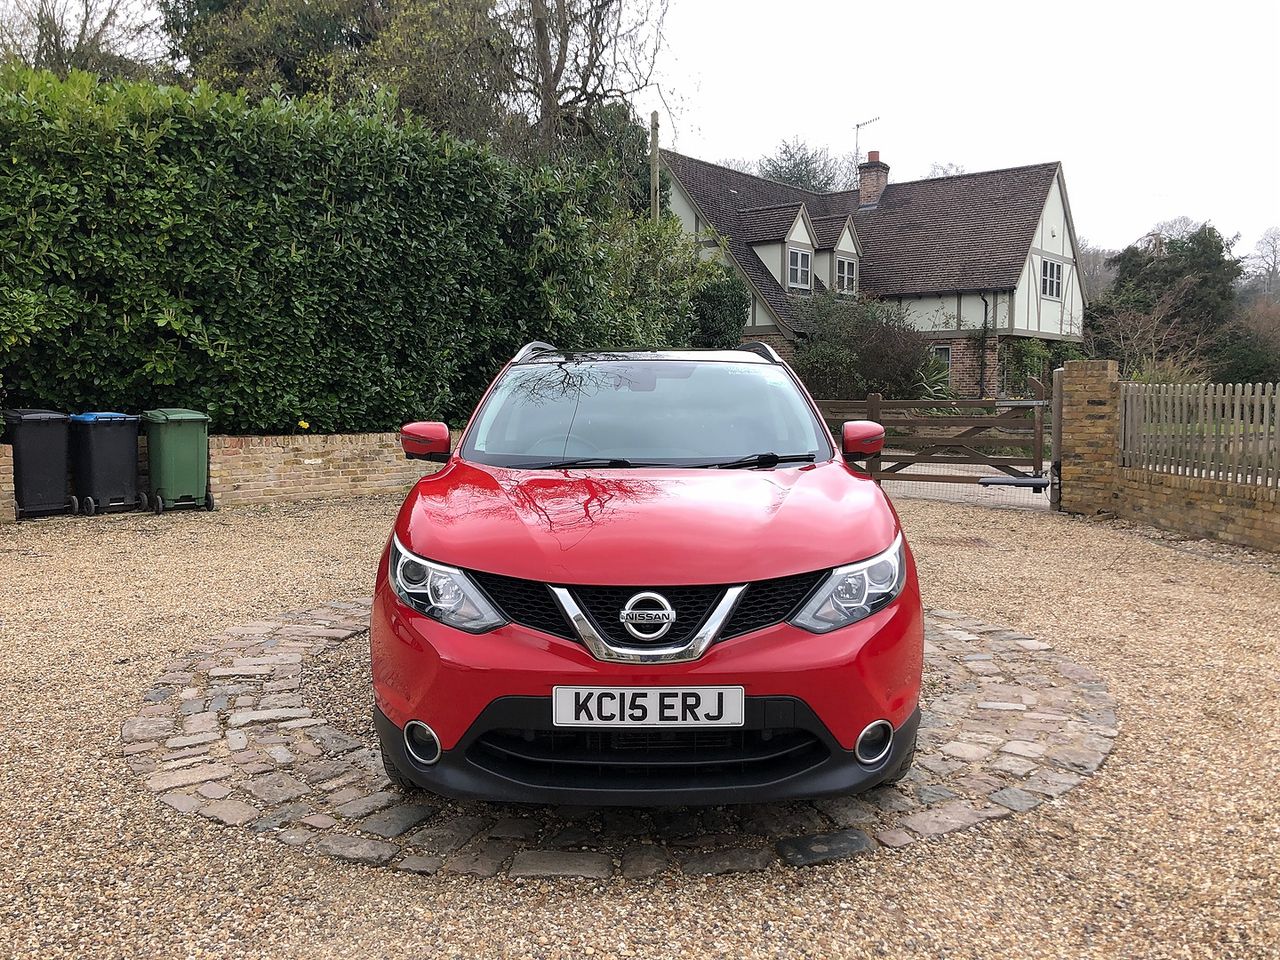 2015 NISSAN QASHQAI n-tec 1.6 dCi 130PS Xtronic - Picture 2 of 11